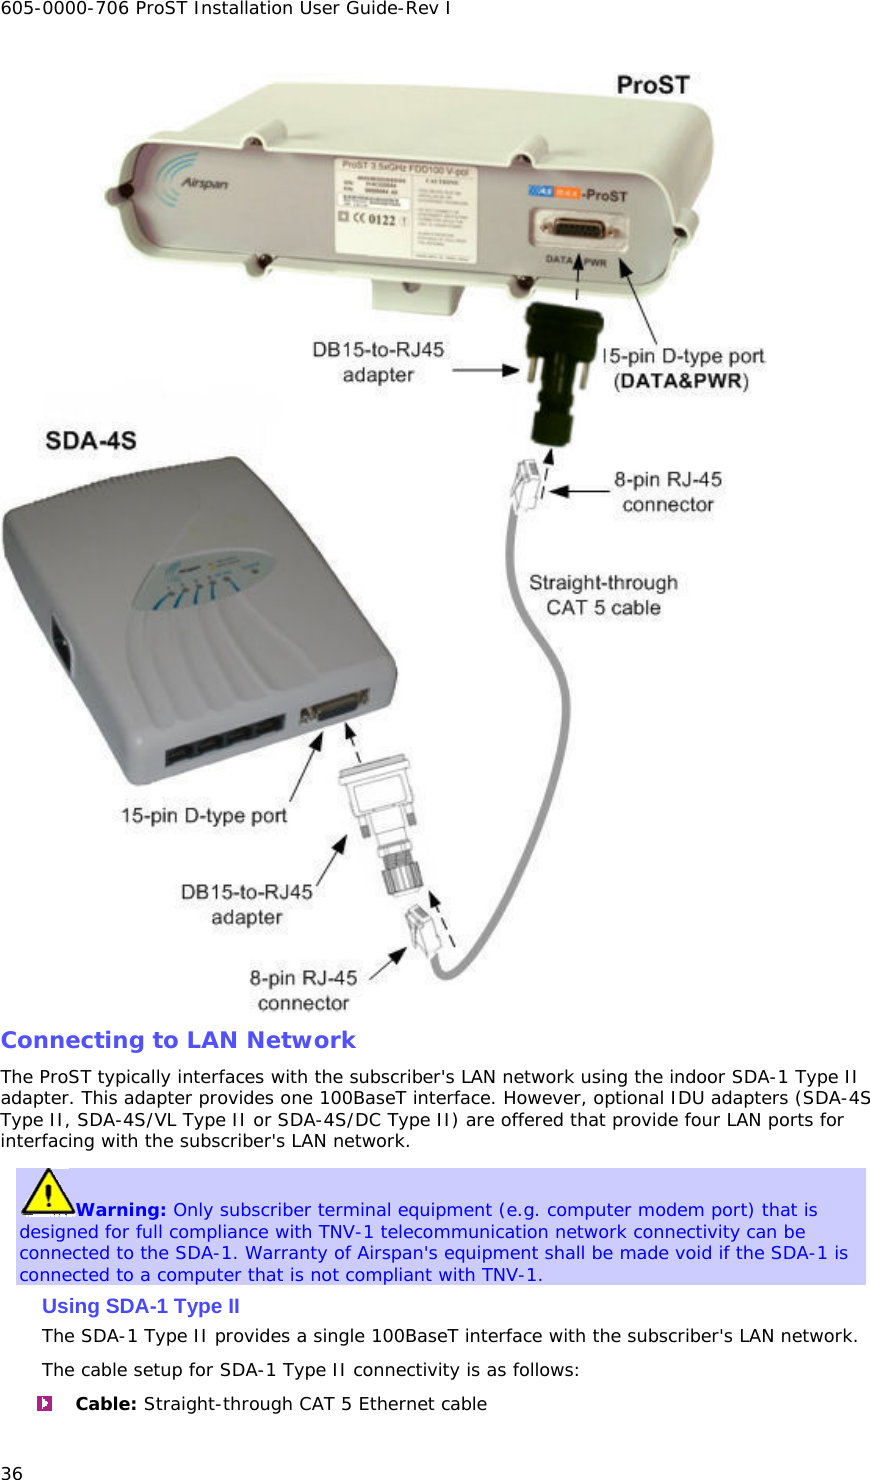 605-0000-706 ProST Installation User Guide-Rev I 36  Connecting to LAN Network The ProST typically interfaces with the subscriber&apos;s LAN network using the indoor SDA-1 Type II adapter. This adapter provides one 100BaseT interface. However, optional IDU adapters (SDA-4S Type II, SDA-4S/VL Type II or SDA-4S/DC Type II) are offered that provide four LAN ports for interfacing with the subscriber&apos;s LAN network. Warning: Only subscriber terminal equipment (e.g. computer modem port) that is designed for full compliance with TNV-1 telecommunication network connectivity can be connected to the SDA-1. Warranty of Airspan&apos;s equipment shall be made void if the SDA-1 is connected to a computer that is not compliant with TNV-1. Using SDA-1 Type II The SDA-1 Type II provides a single 100BaseT interface with the subscriber&apos;s LAN network. The cable setup for SDA-1 Type II connectivity is as follows:  Cable: Straight-through CAT 5 Ethernet cable 